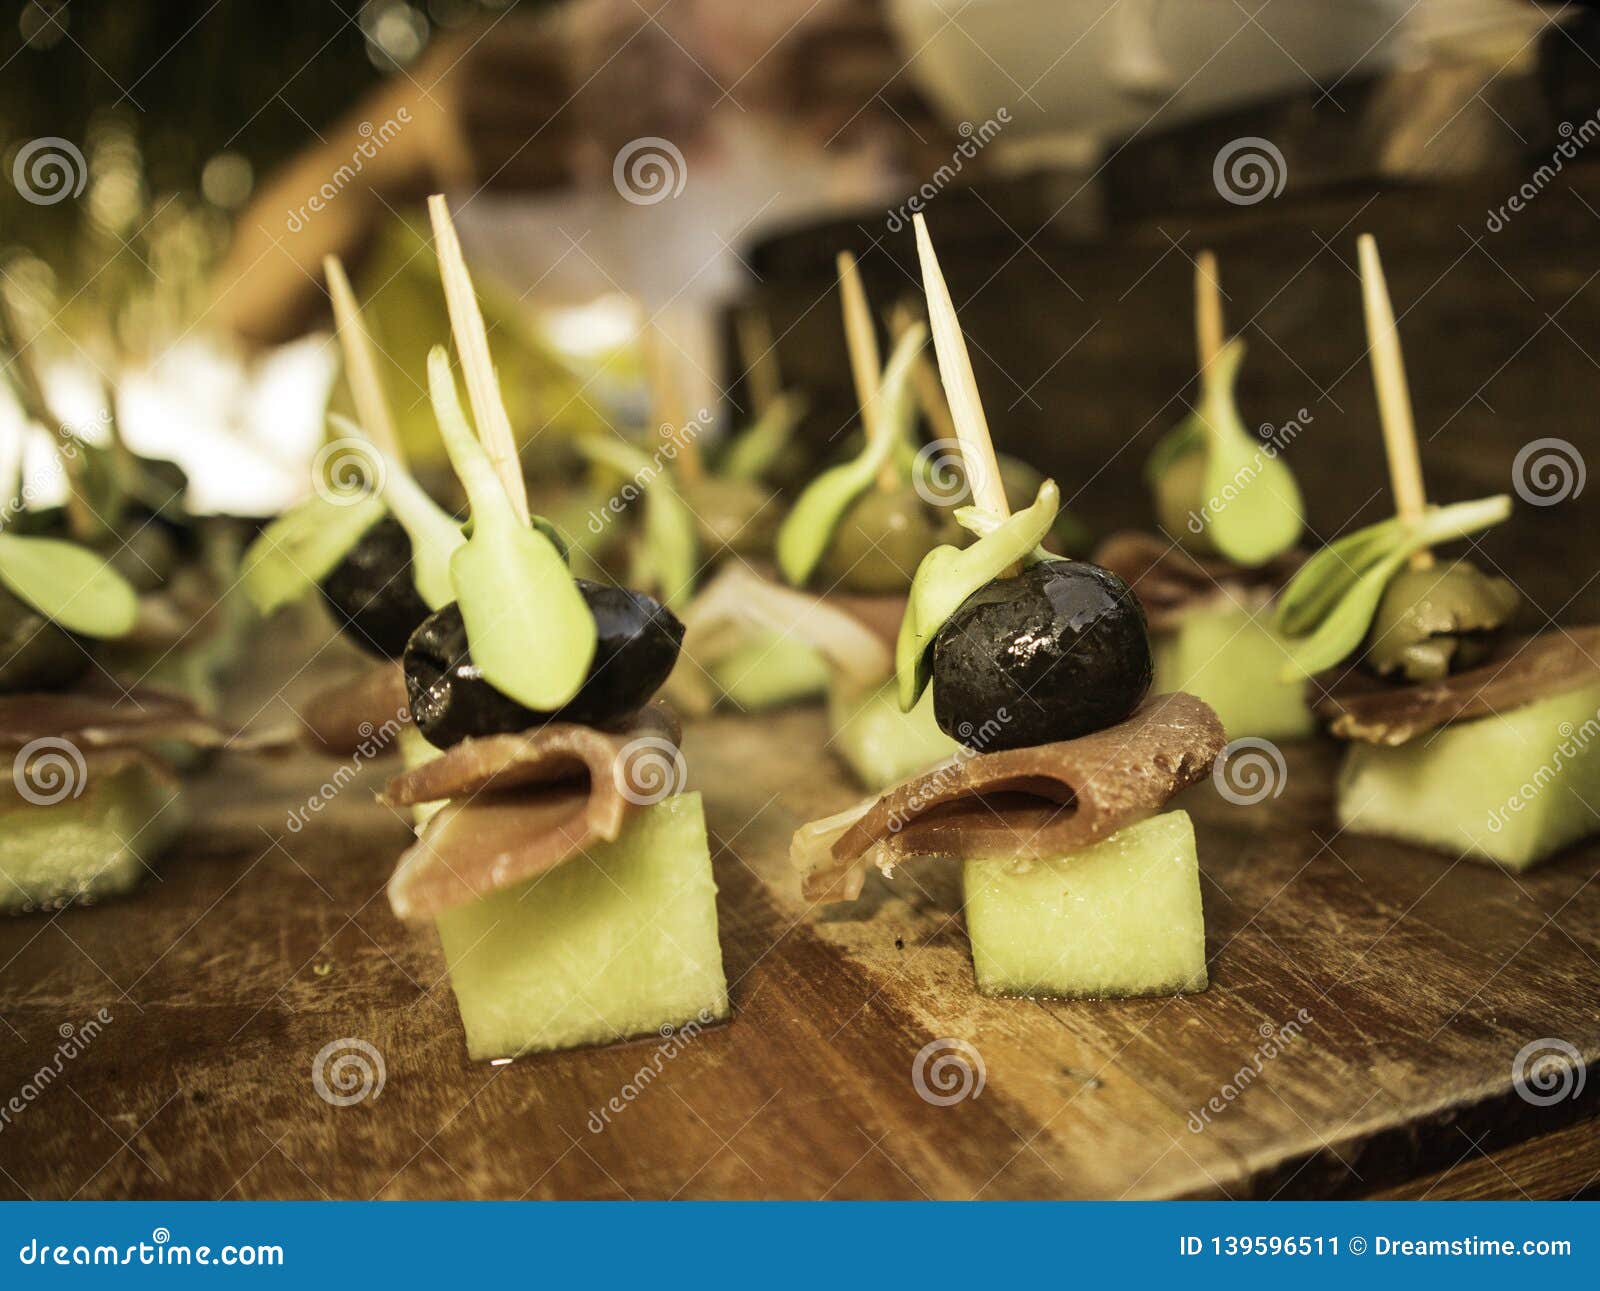 mediterranean canape with olives and pineapple